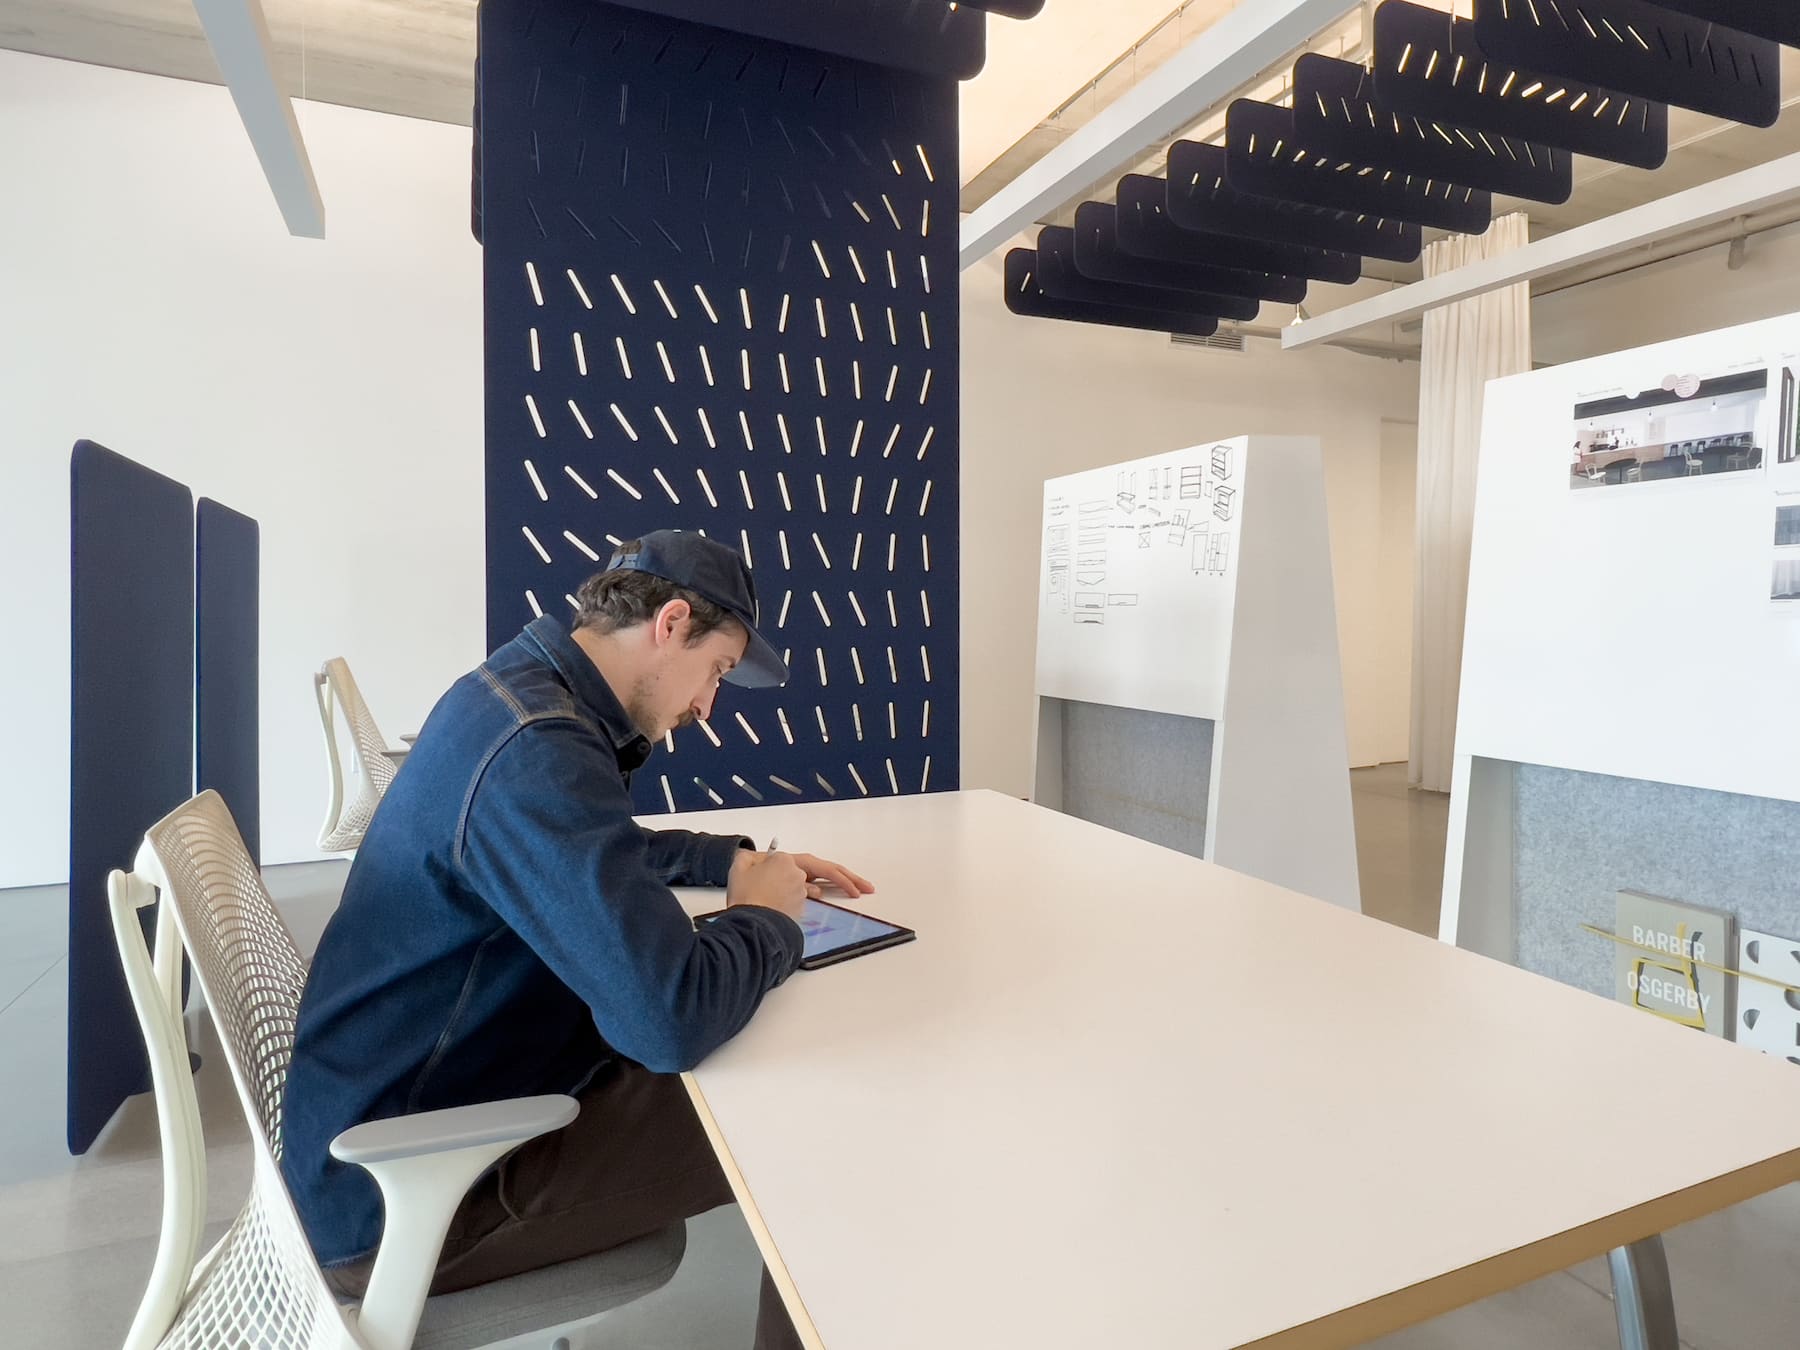 Buffer room divider, Gravity hanging screen, and Sky ceiling baffles in modern office space